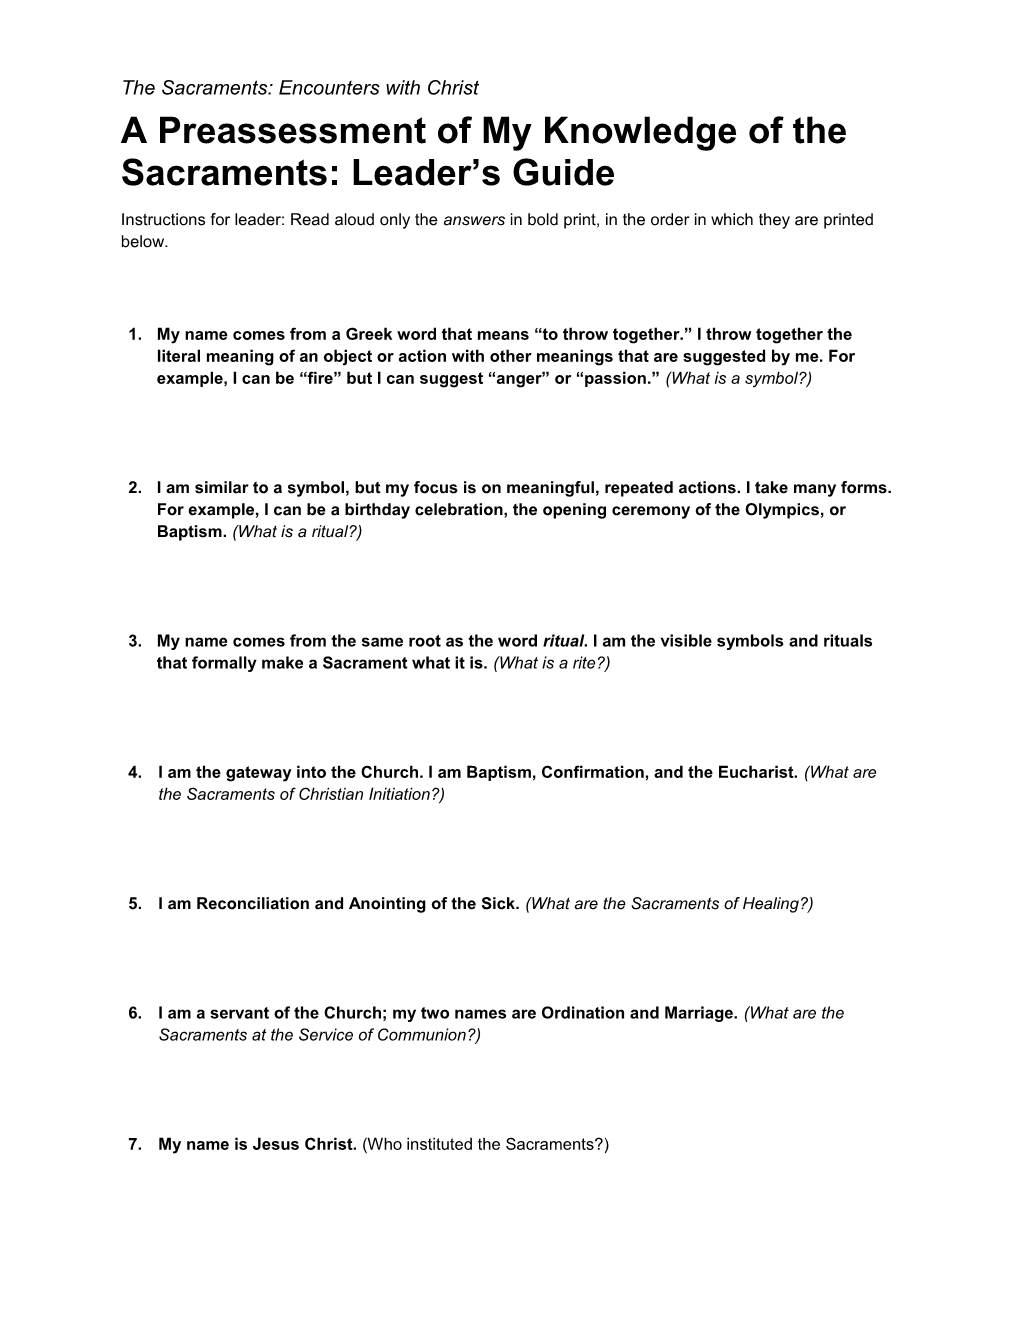 A Preassessment of My Knowledge of the Sacraments: Leader S Guide